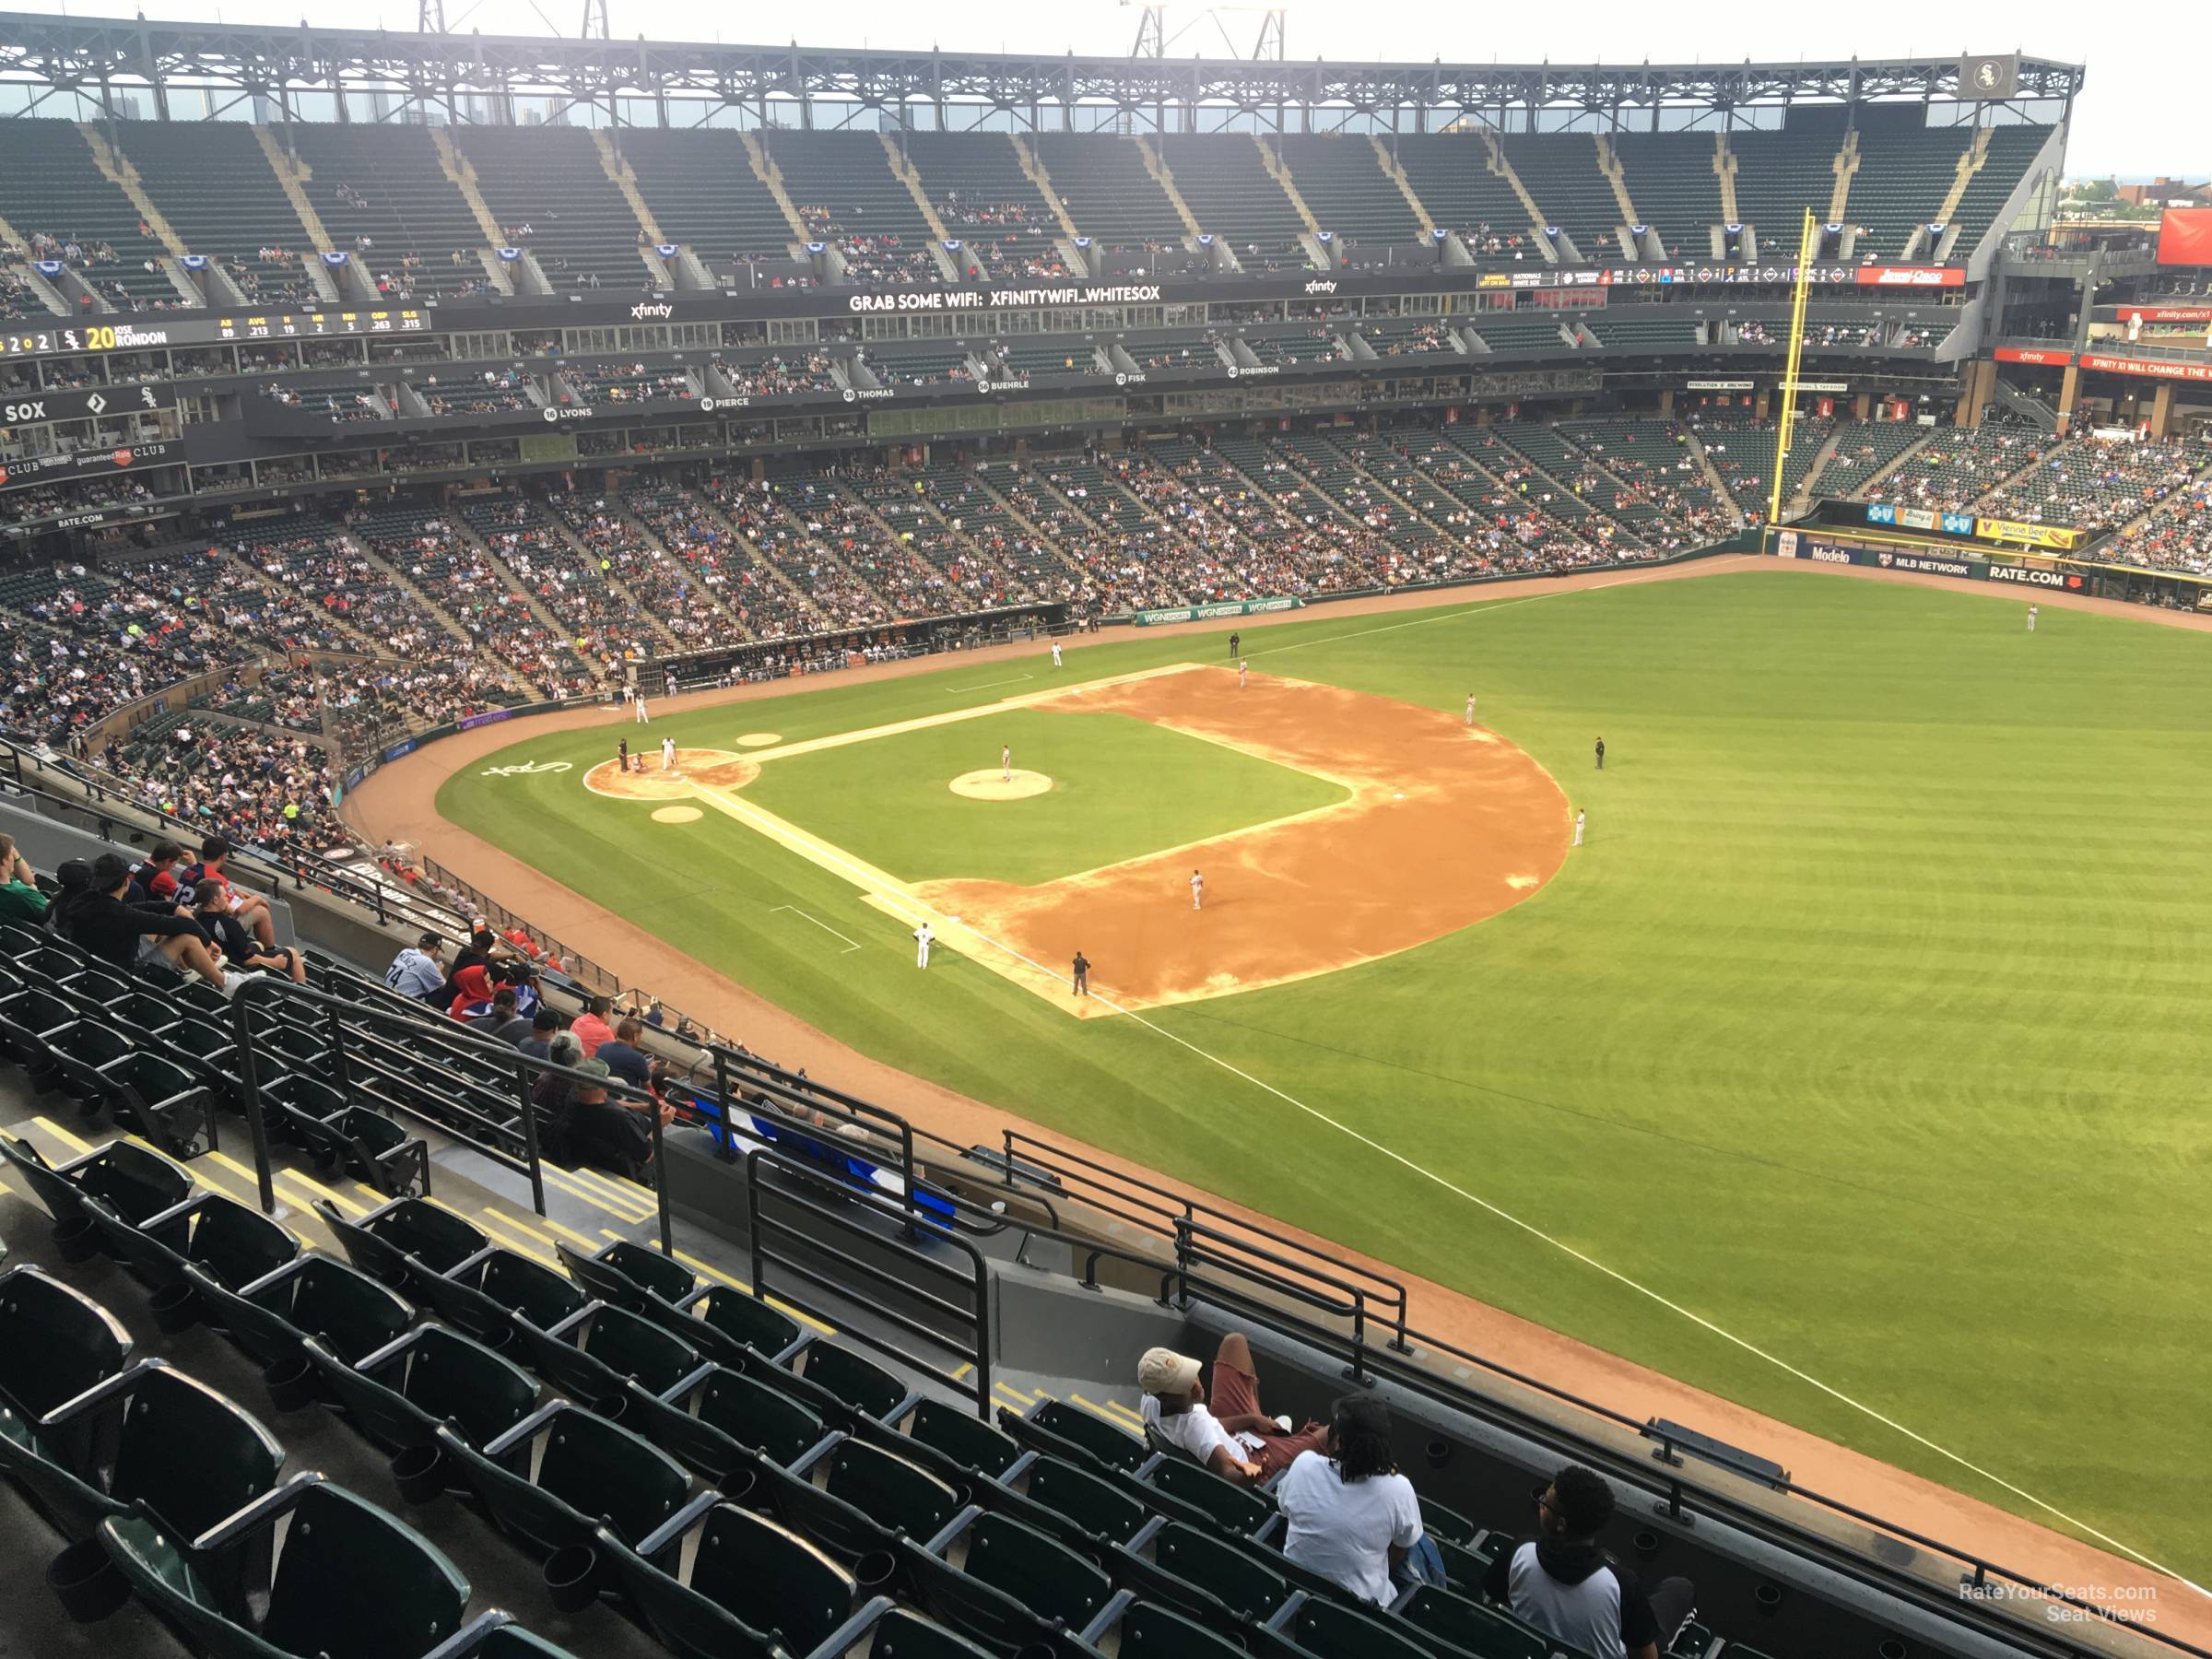 section 514, row 12 seat view  - guaranteed rate field